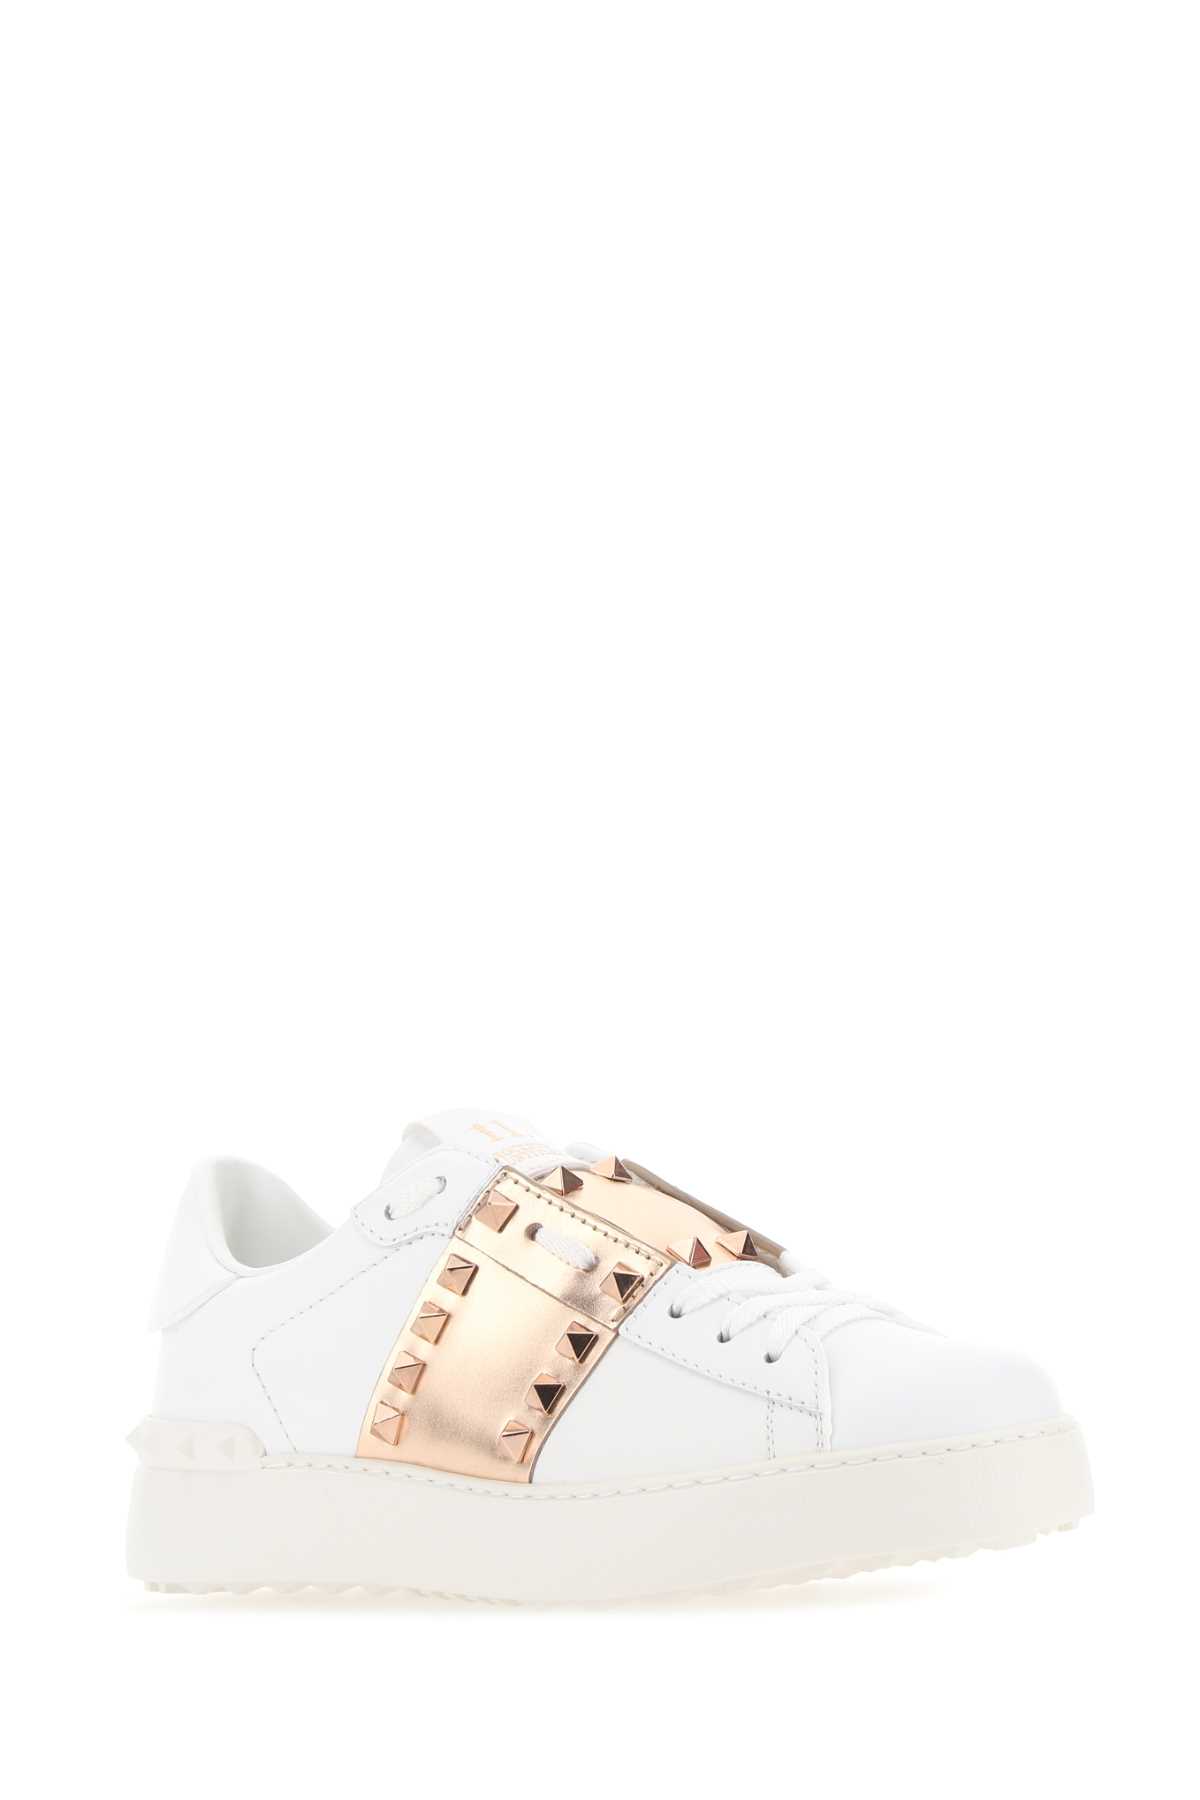 Shop Valentino White Leather Rockstud Untitled Sneakers With Gold Rose Band In Biancoramebianco